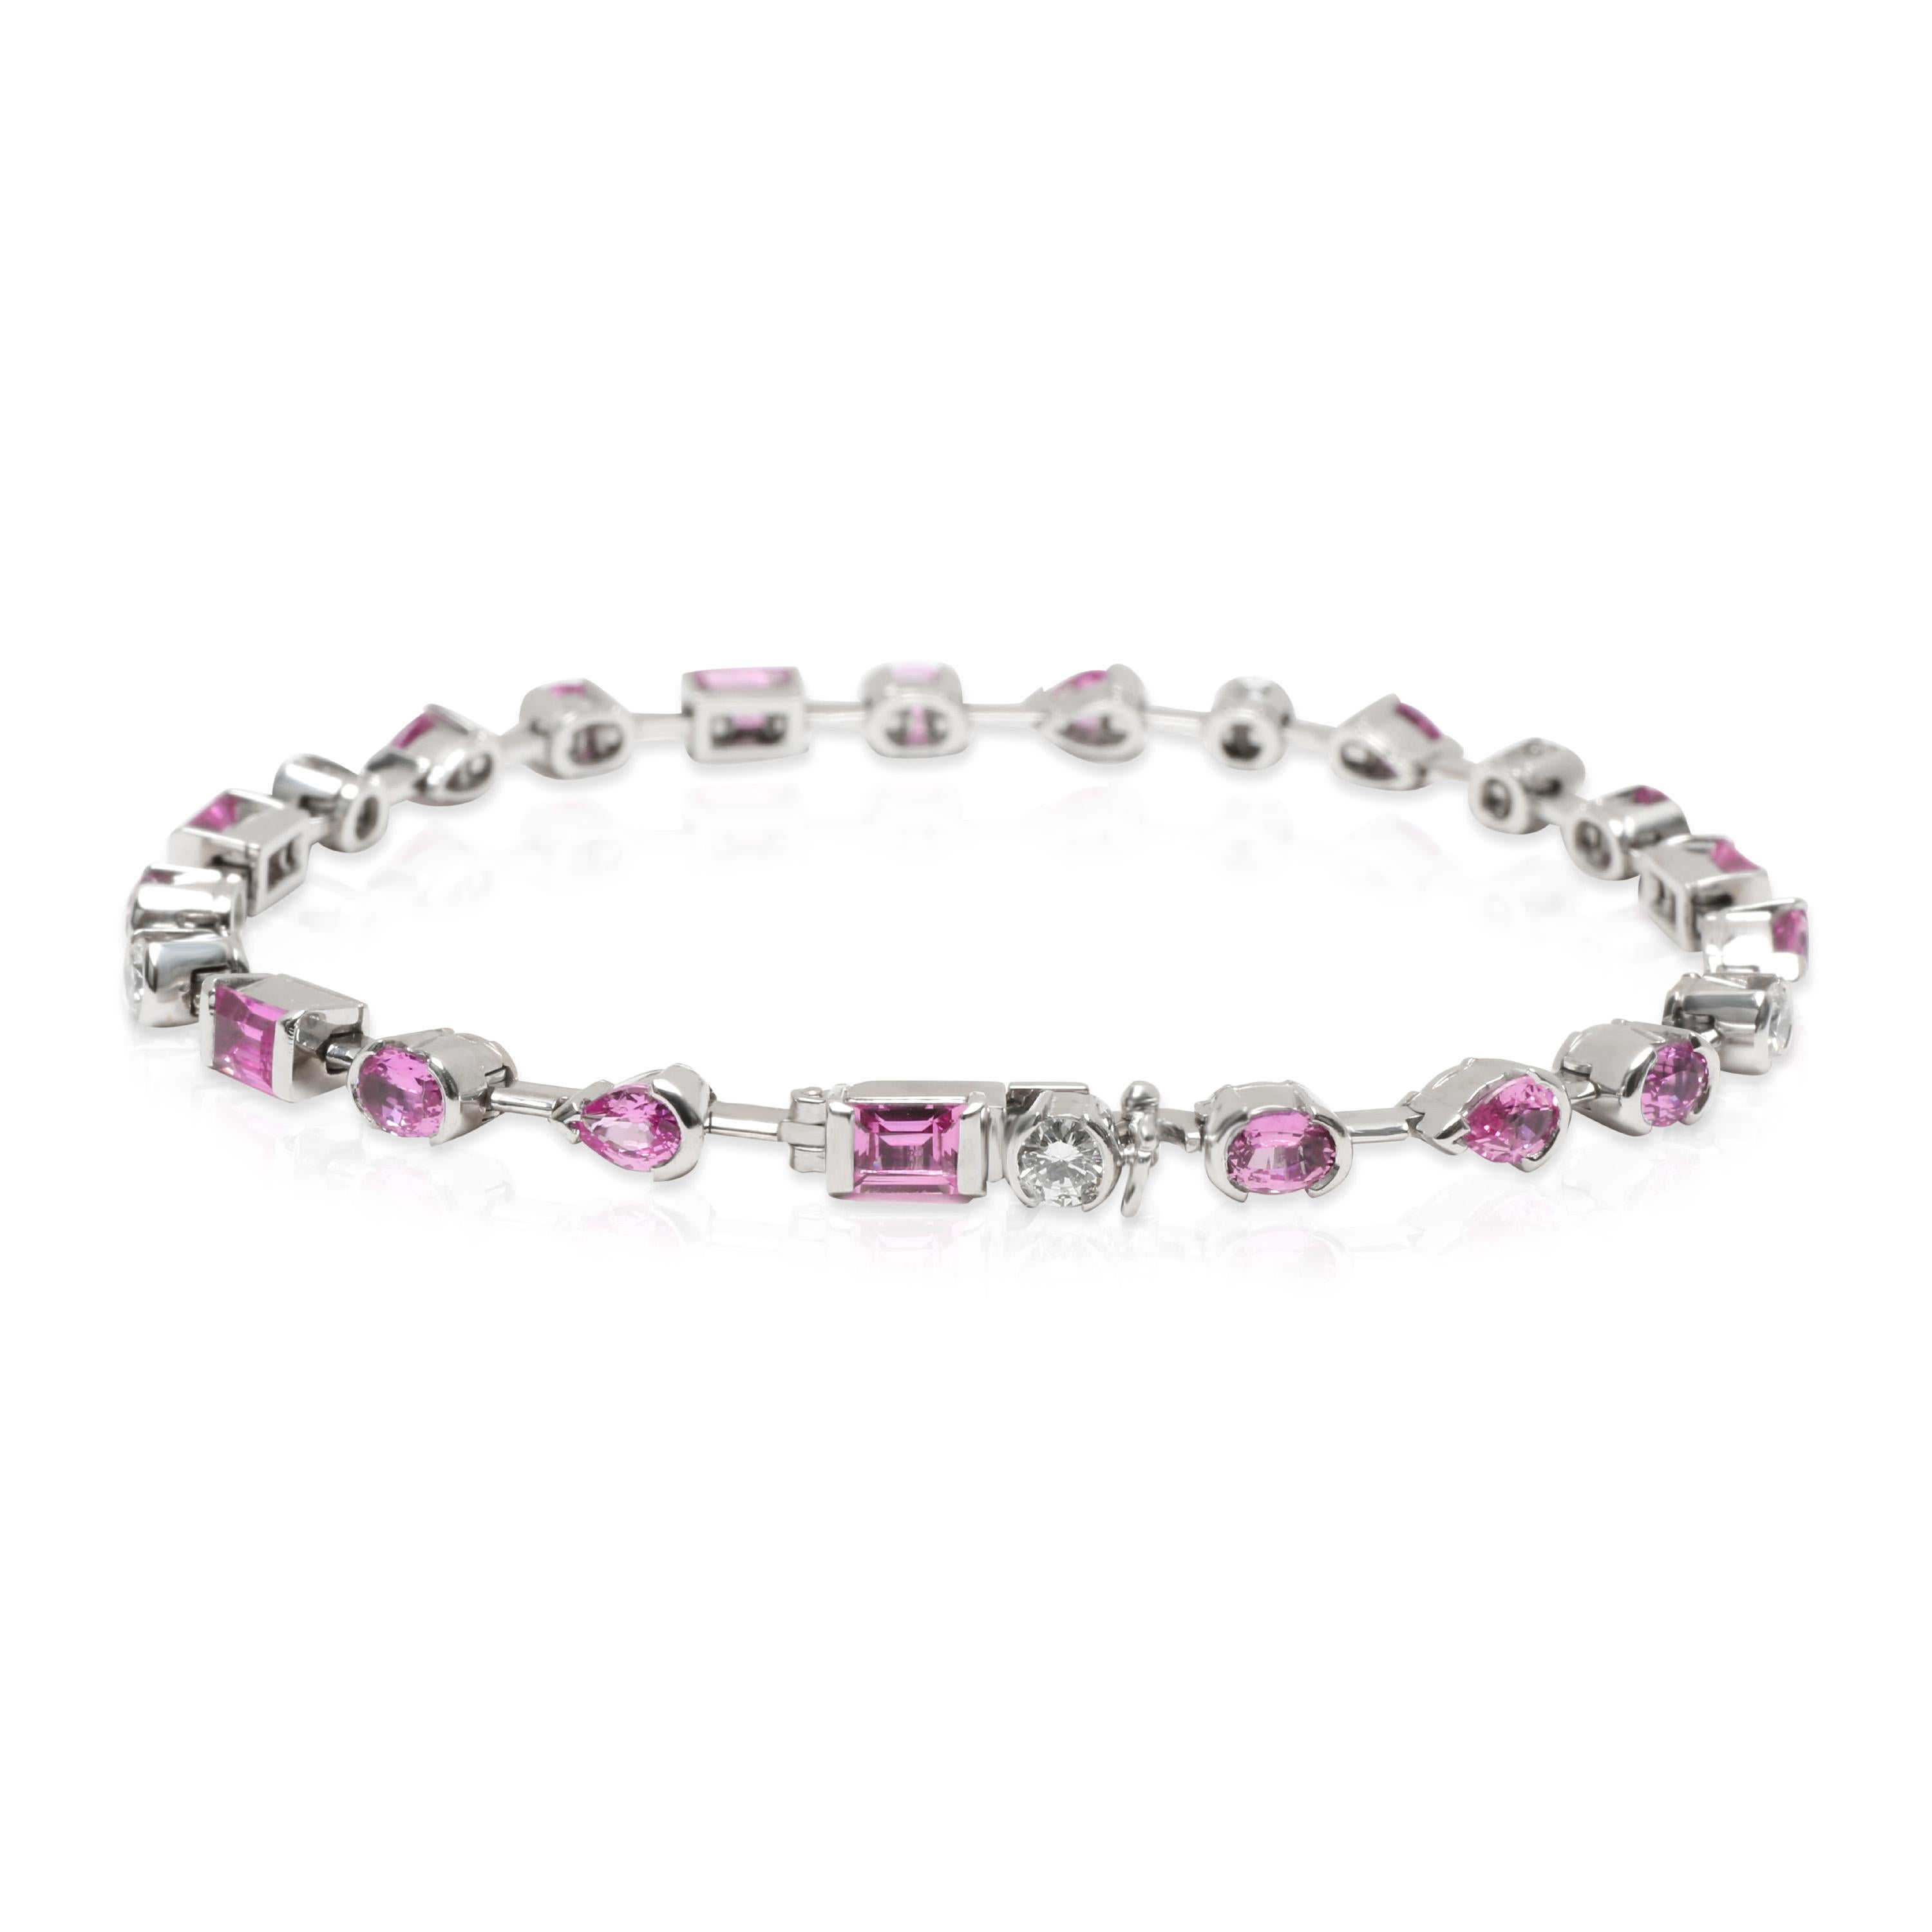 Cartier Meli Melo Pink Sapphire & Diamond Bracelet in 18K White Gold 0.6 CTW

PRIMARY DETAILS
SKU: 103346
Listing Title: Cartier Meli Melo Pink Sapphire & Diamond Bracelet in 18K White Gold 0.6 CTW
Condition Description: Retails for 10000 USD. In